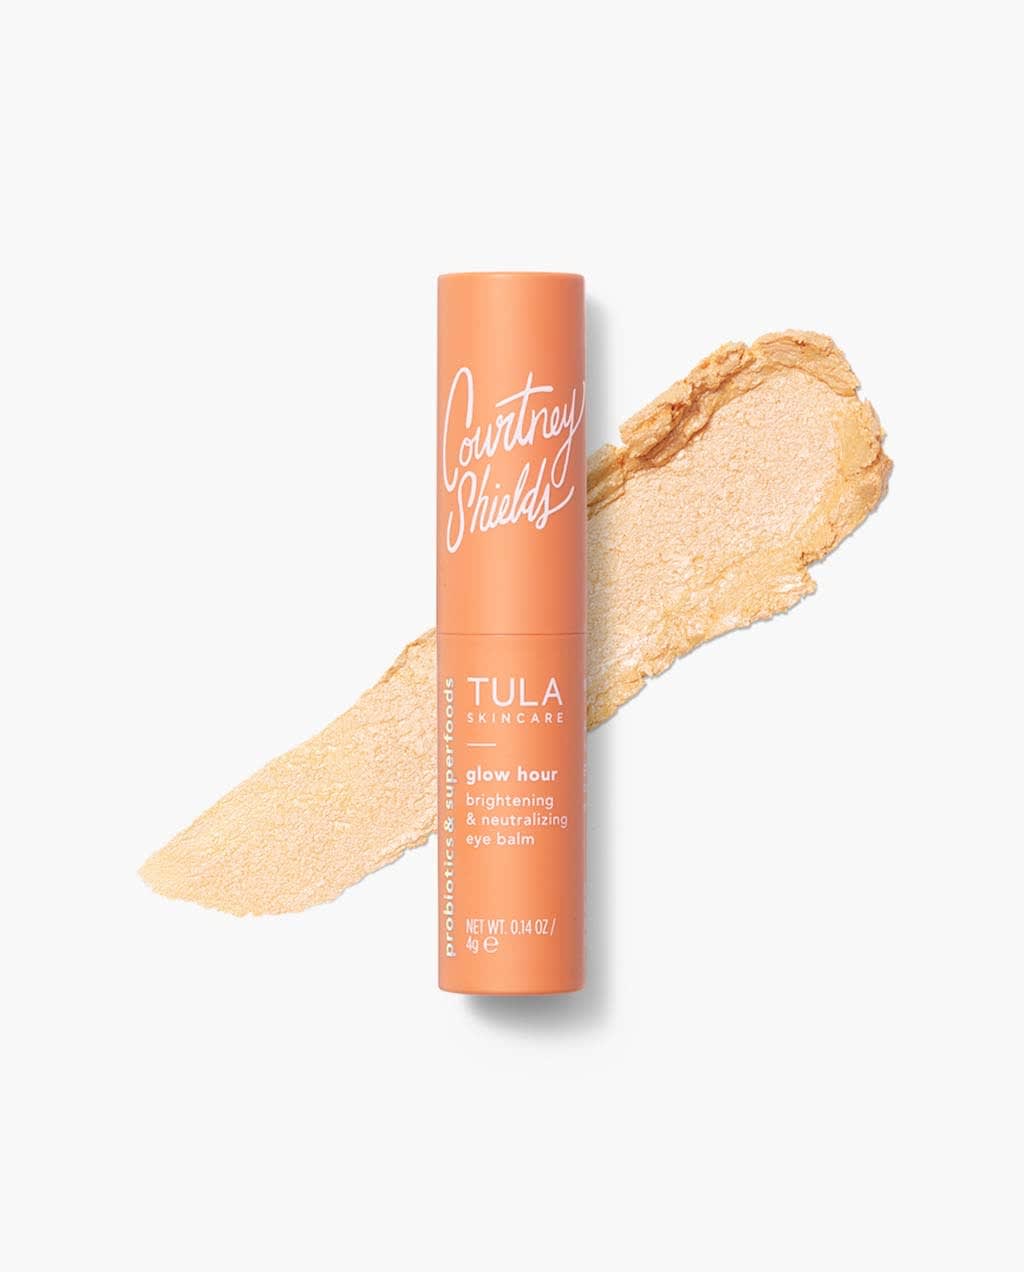 TULA Skin Care Glow Hour Brightening & Neutralizing Eye Balm | Dark Circle Under Eye Treatment, Instantly Hydrate and Brighten Undereye Area, Portable and Perfect to Use On-the-go | 0.14 oz.